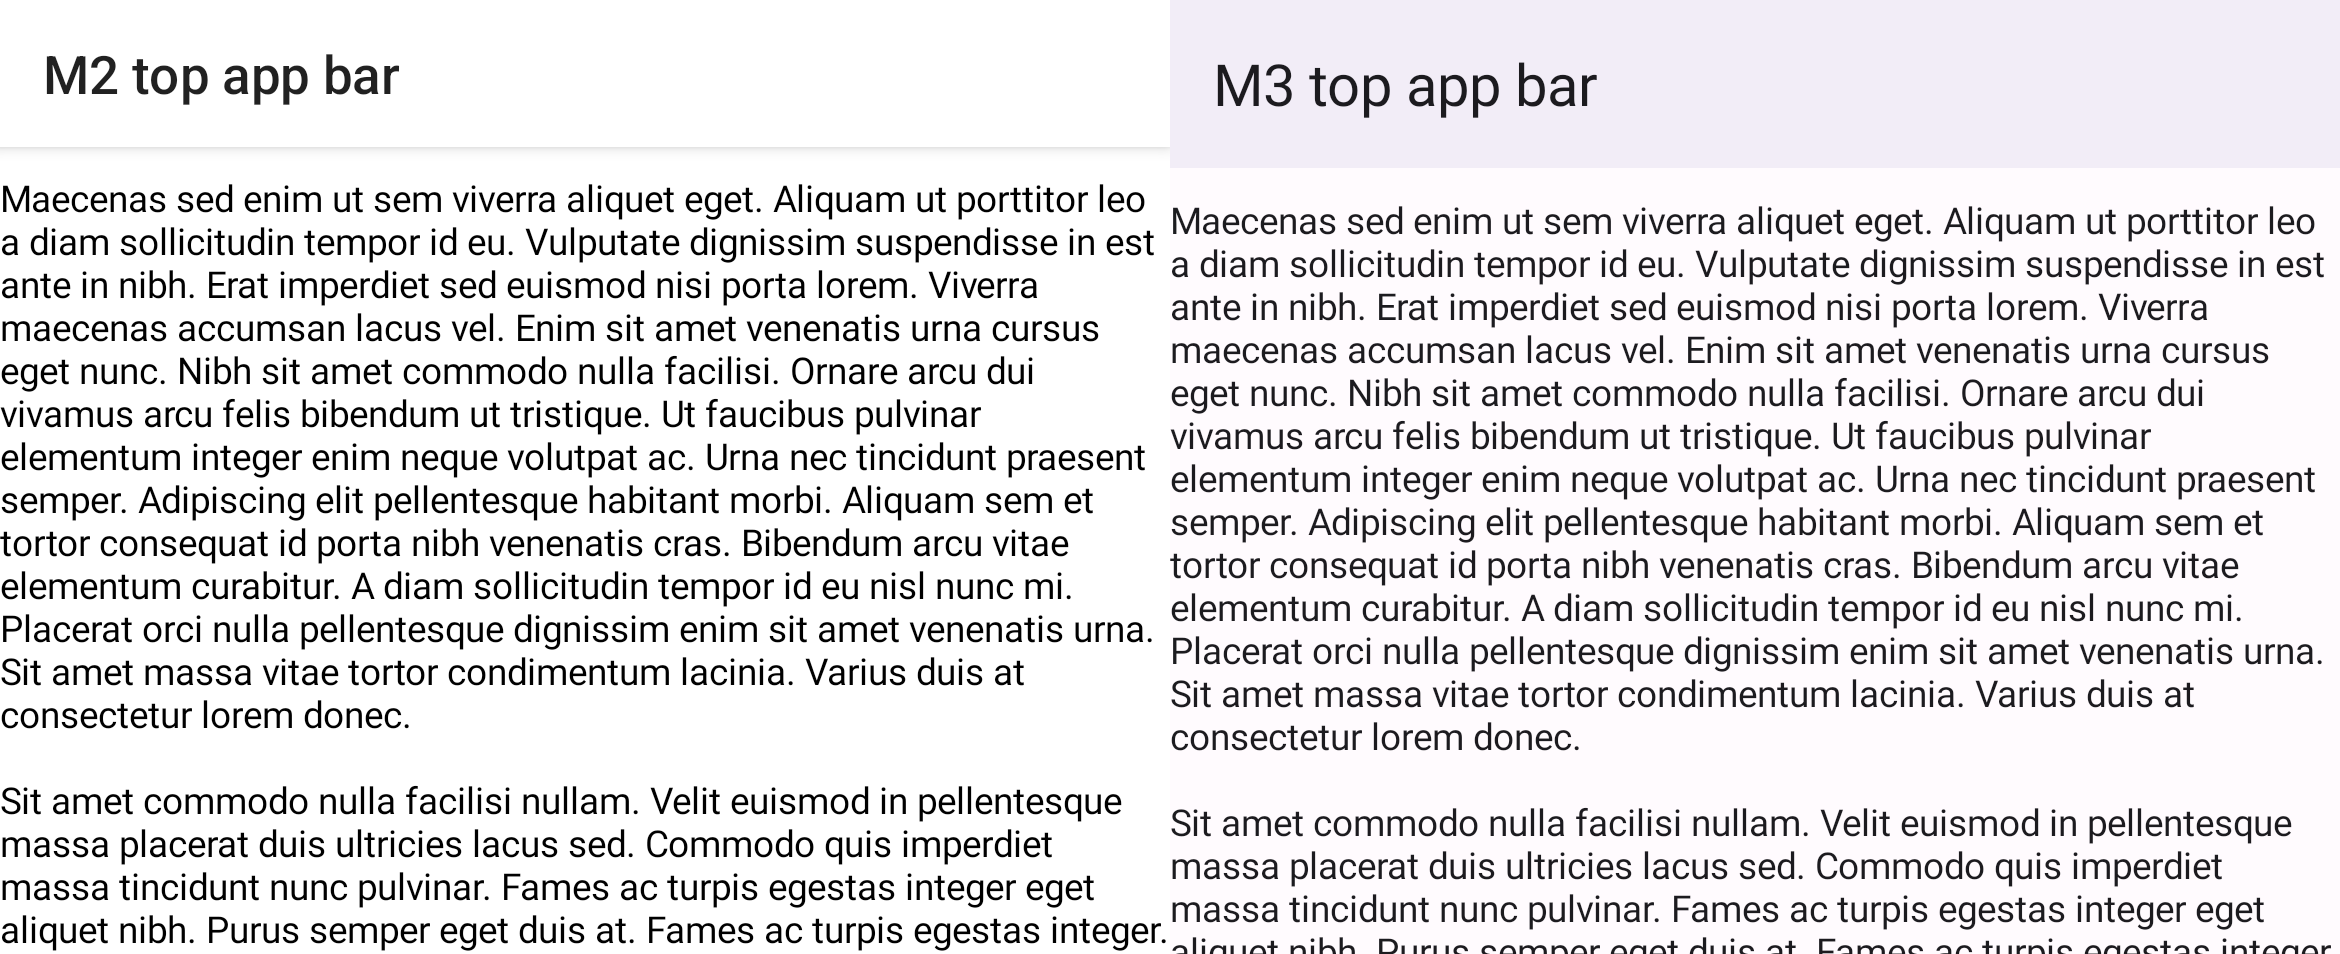 Comparison of M2 and M3 scaffold with top app bar and scrolled list